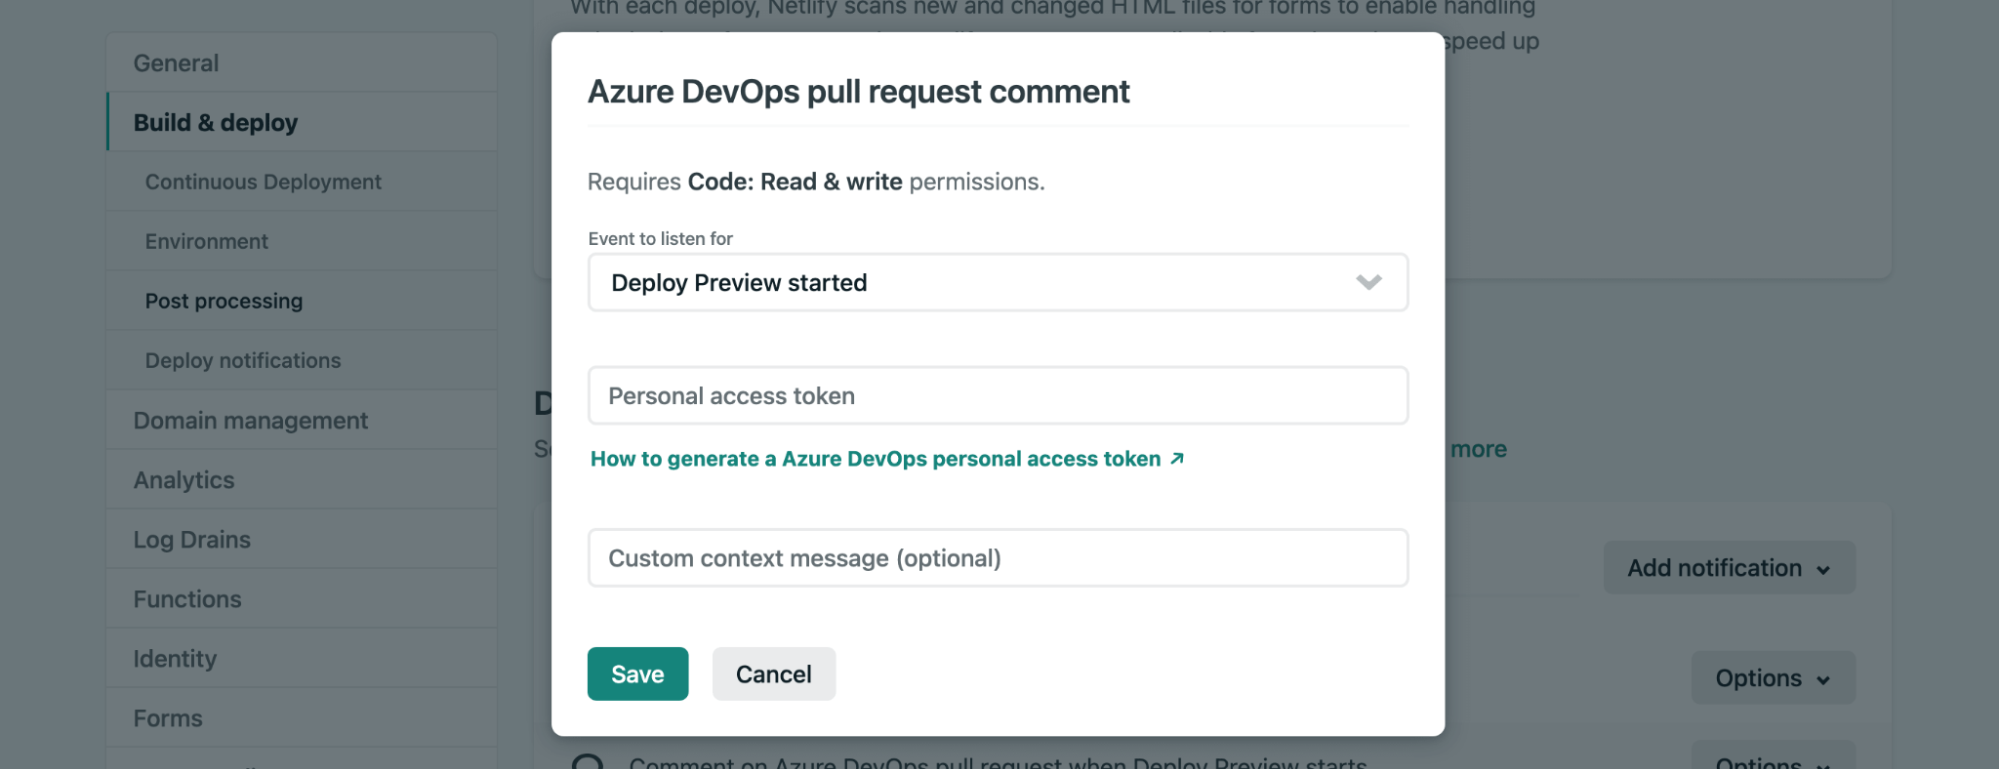 Give Netlify Code: Read & write permissions to pull requests comments in Azure DevOps.